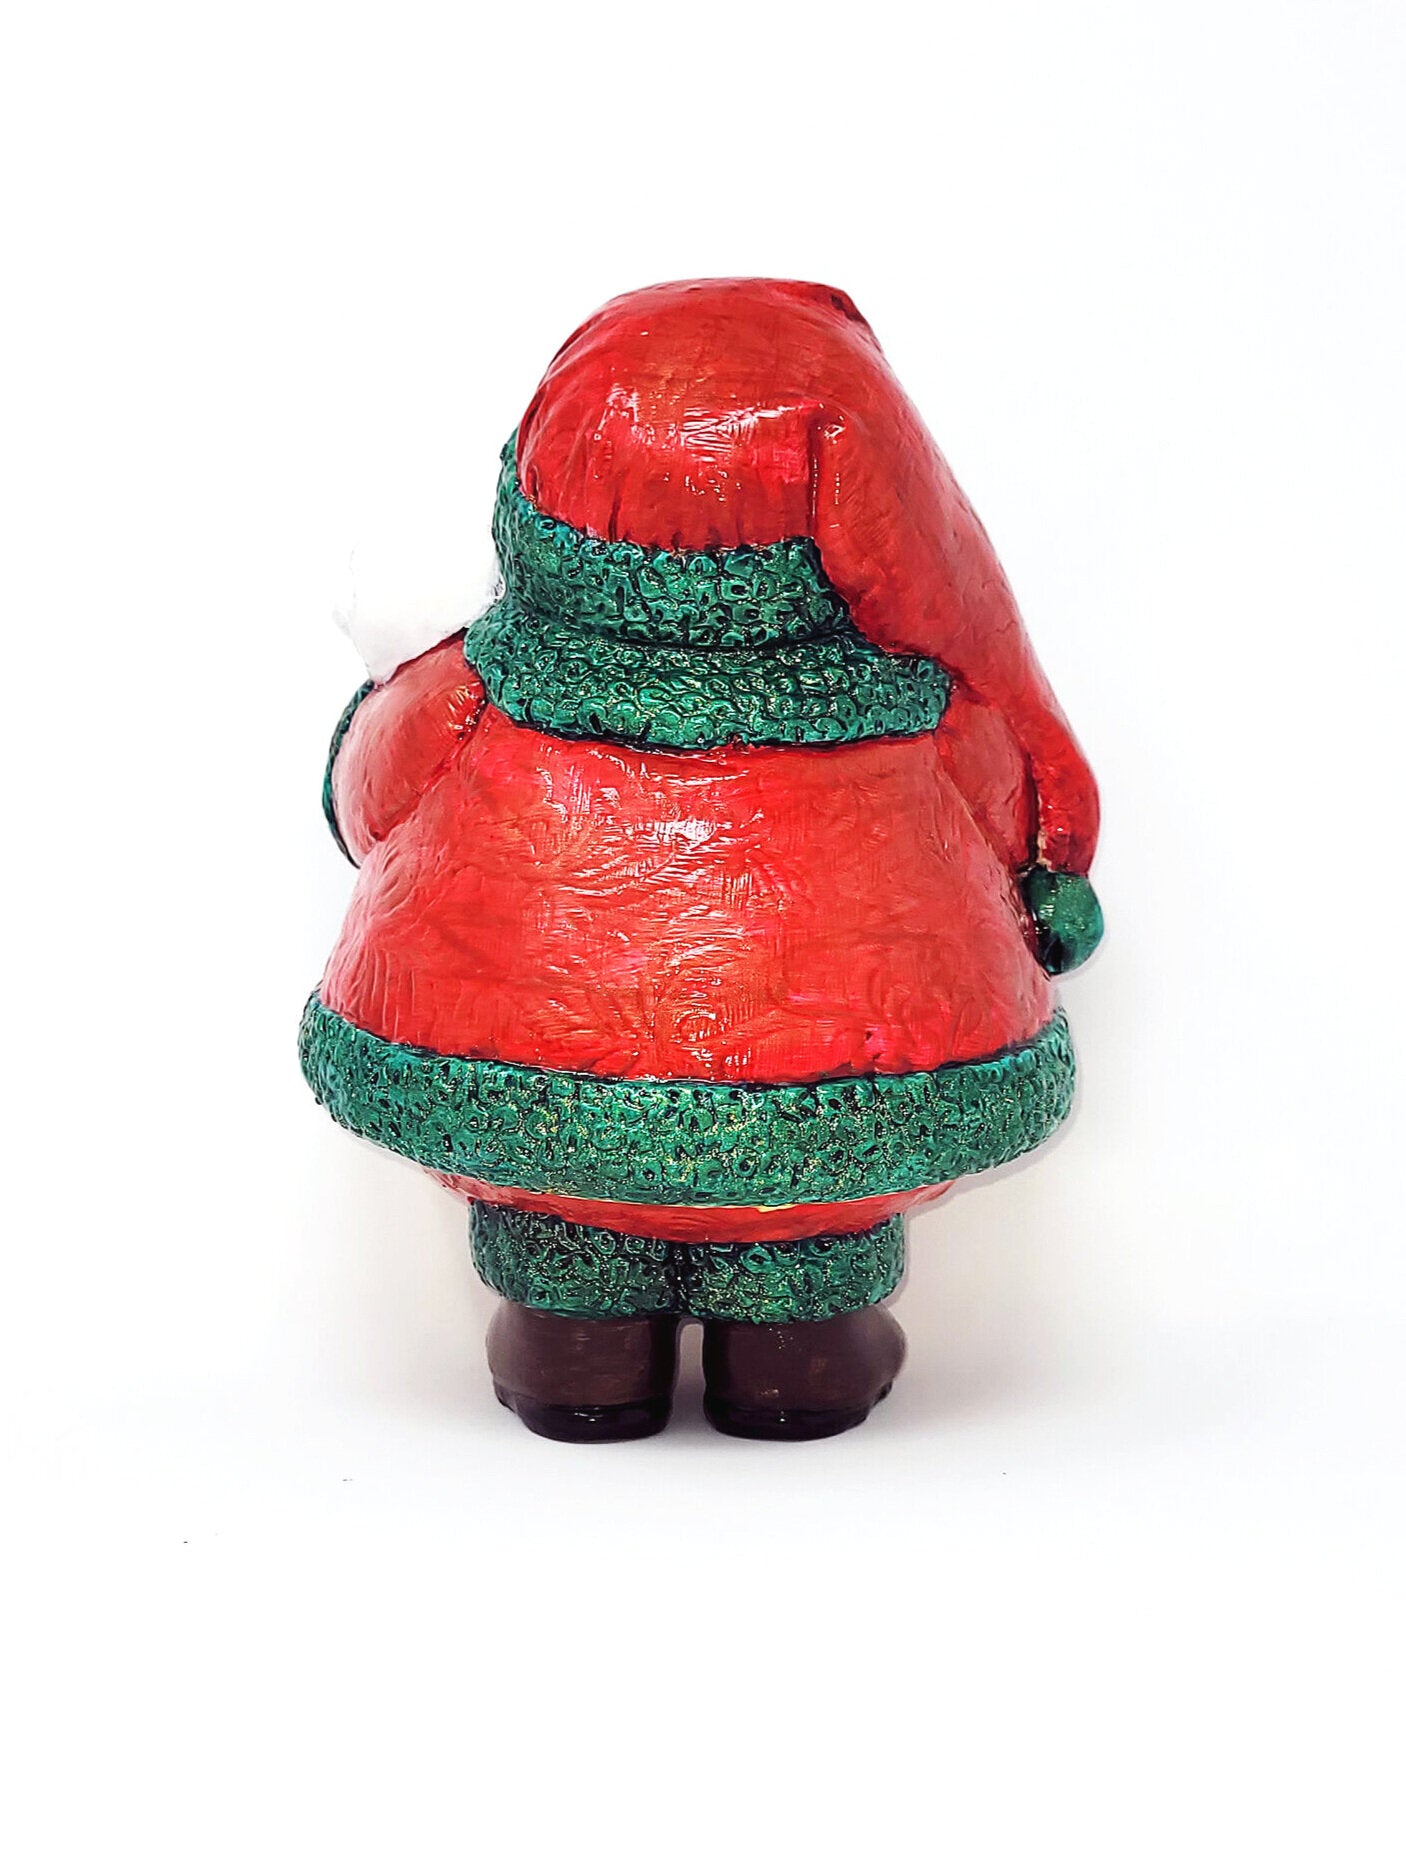 Roly Poly List Santa: Red & Green